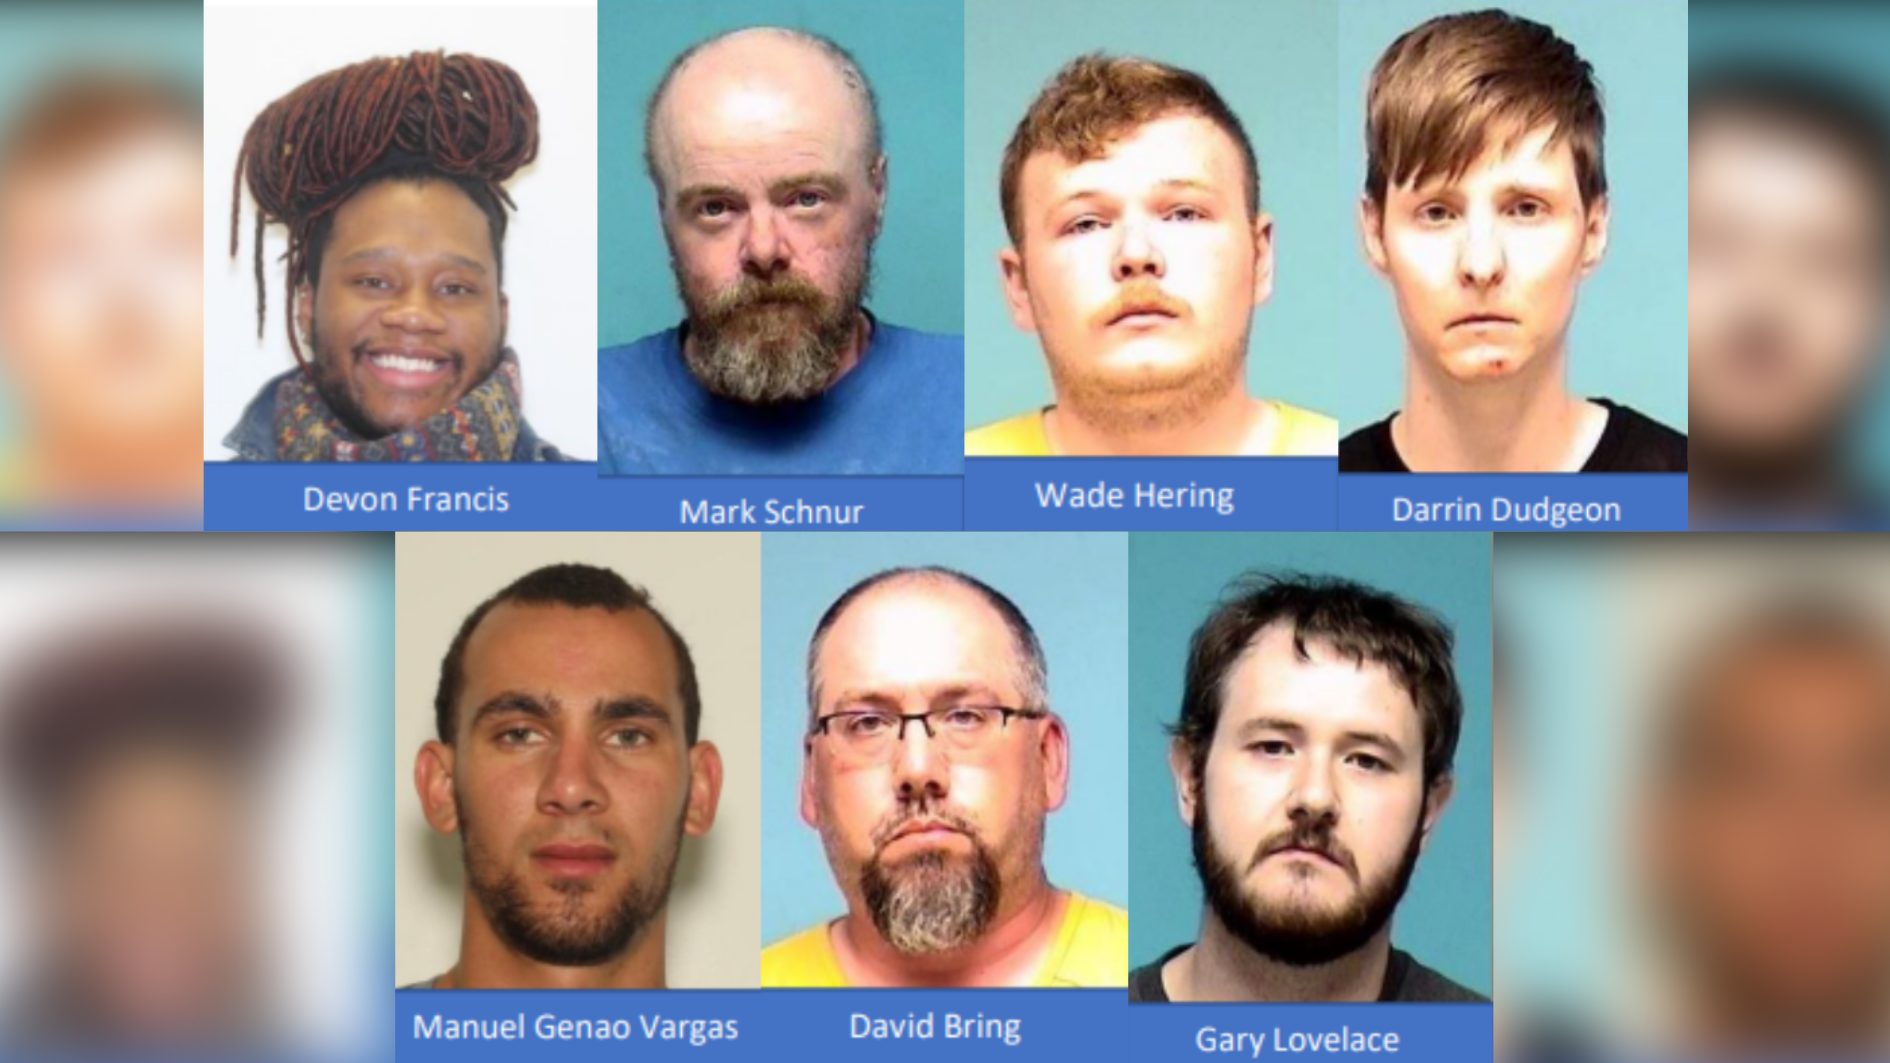 Undercover online sex sting results in 7 arrests, officials picture